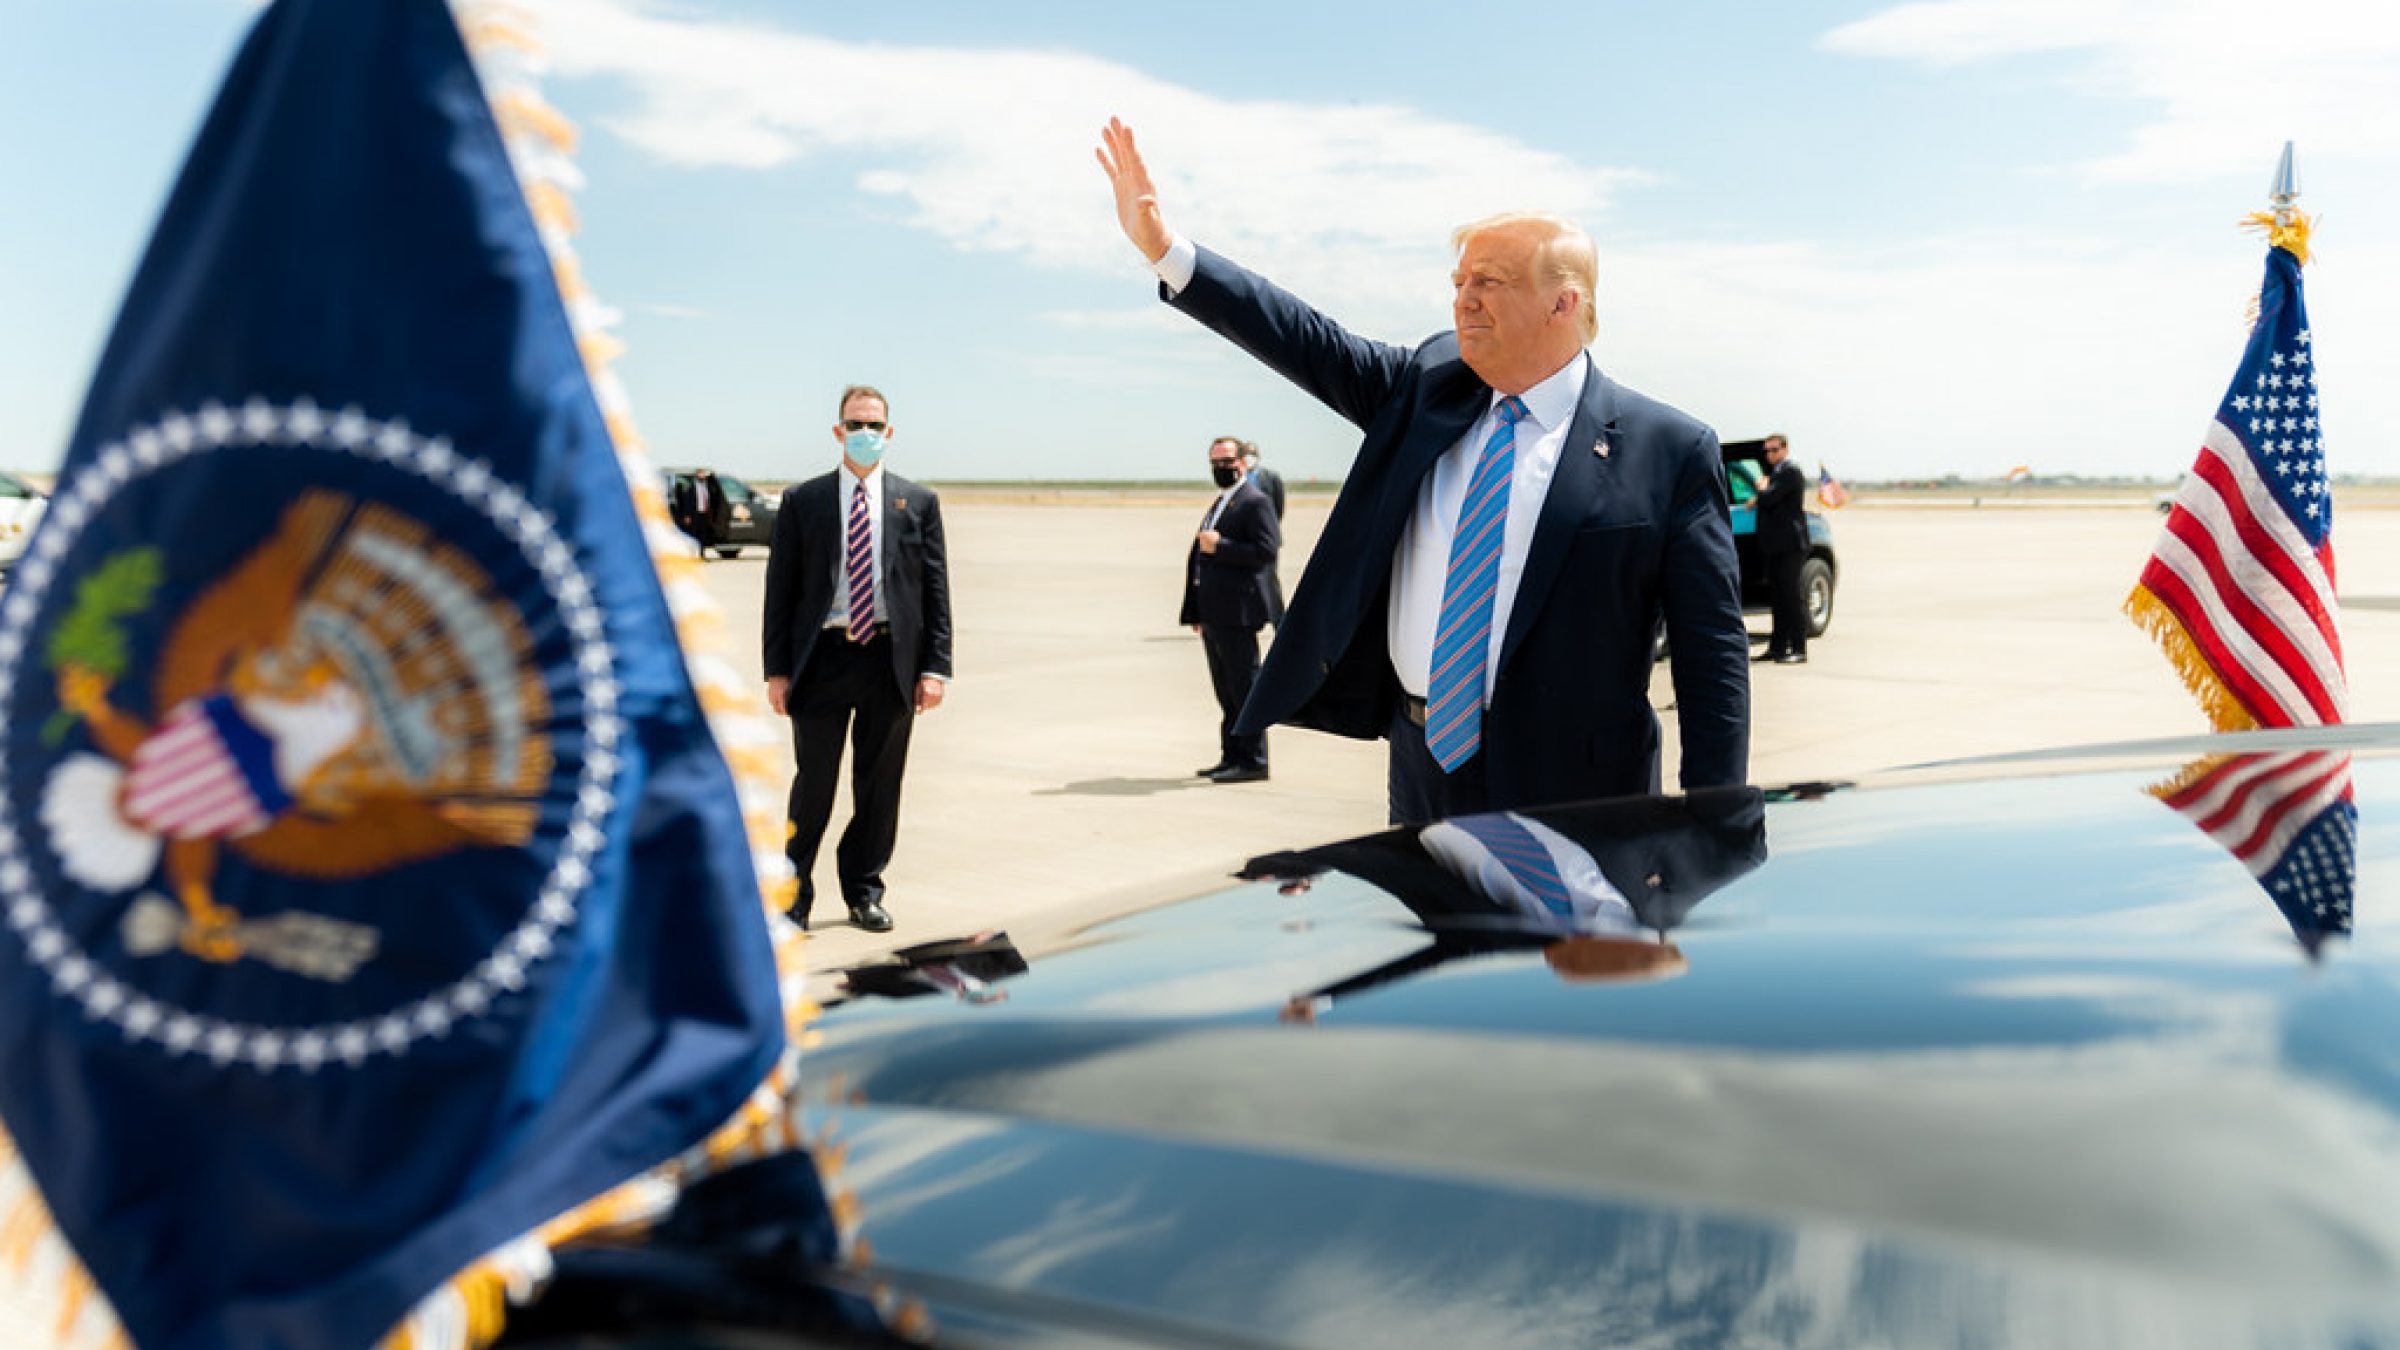 President Trump waves before stepping into his motorcade